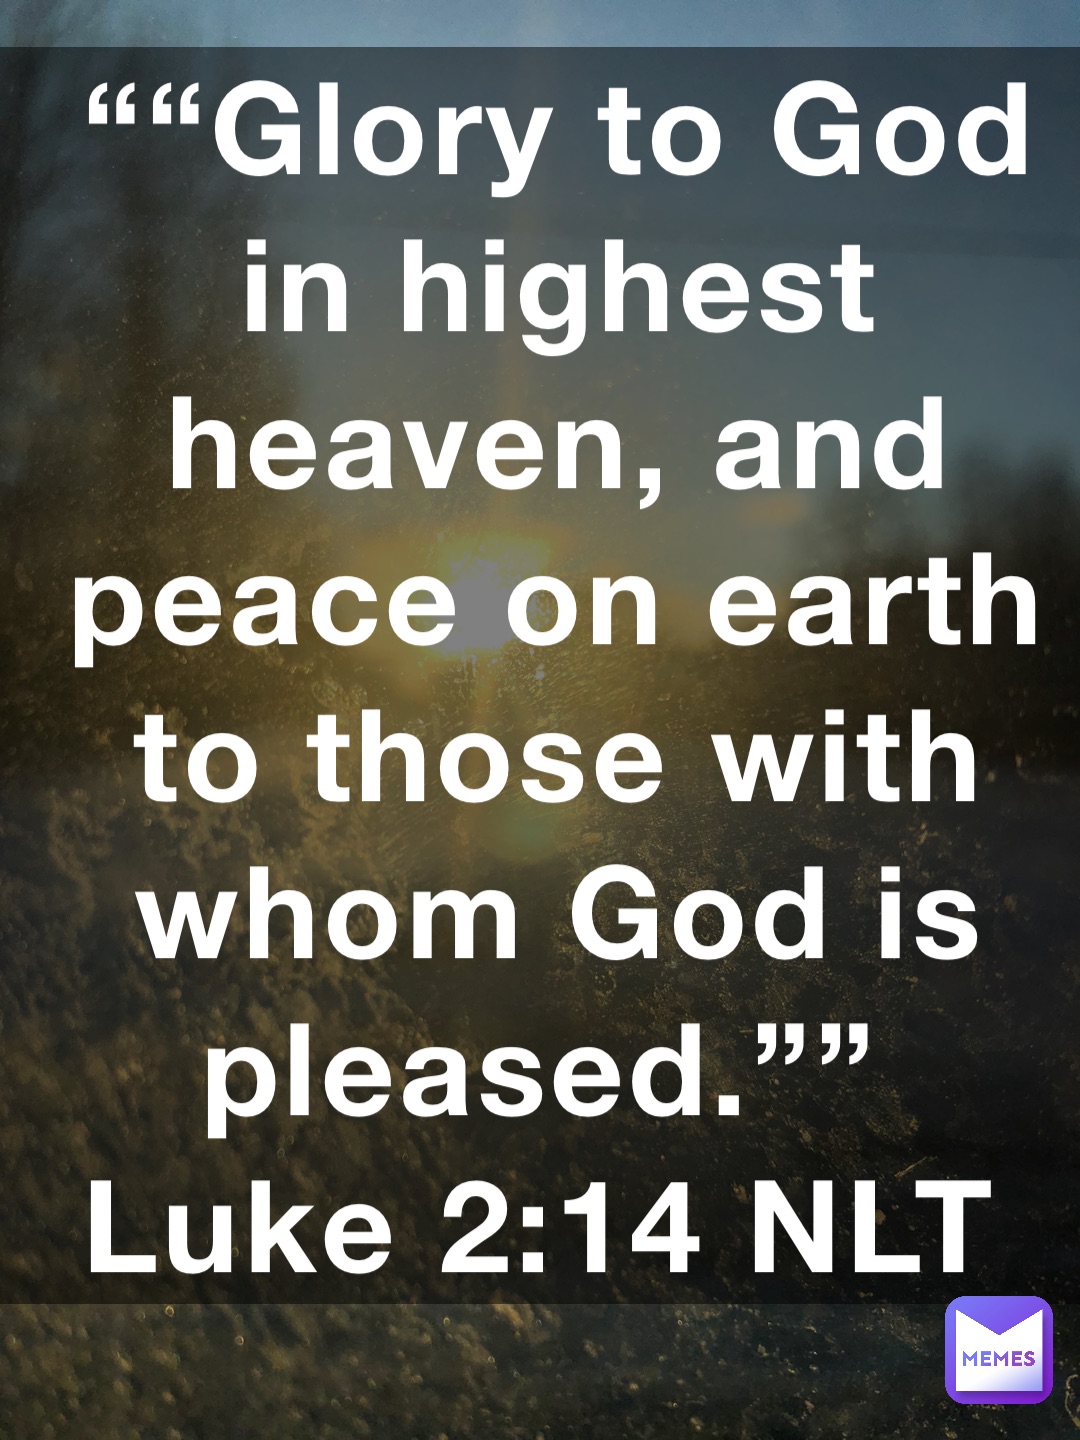 ““Glory to God in highest heaven, and peace on earth to those with whom God is pleased.””
‭‭Luke‬ ‭2:14‬ ‭NLT‬‬